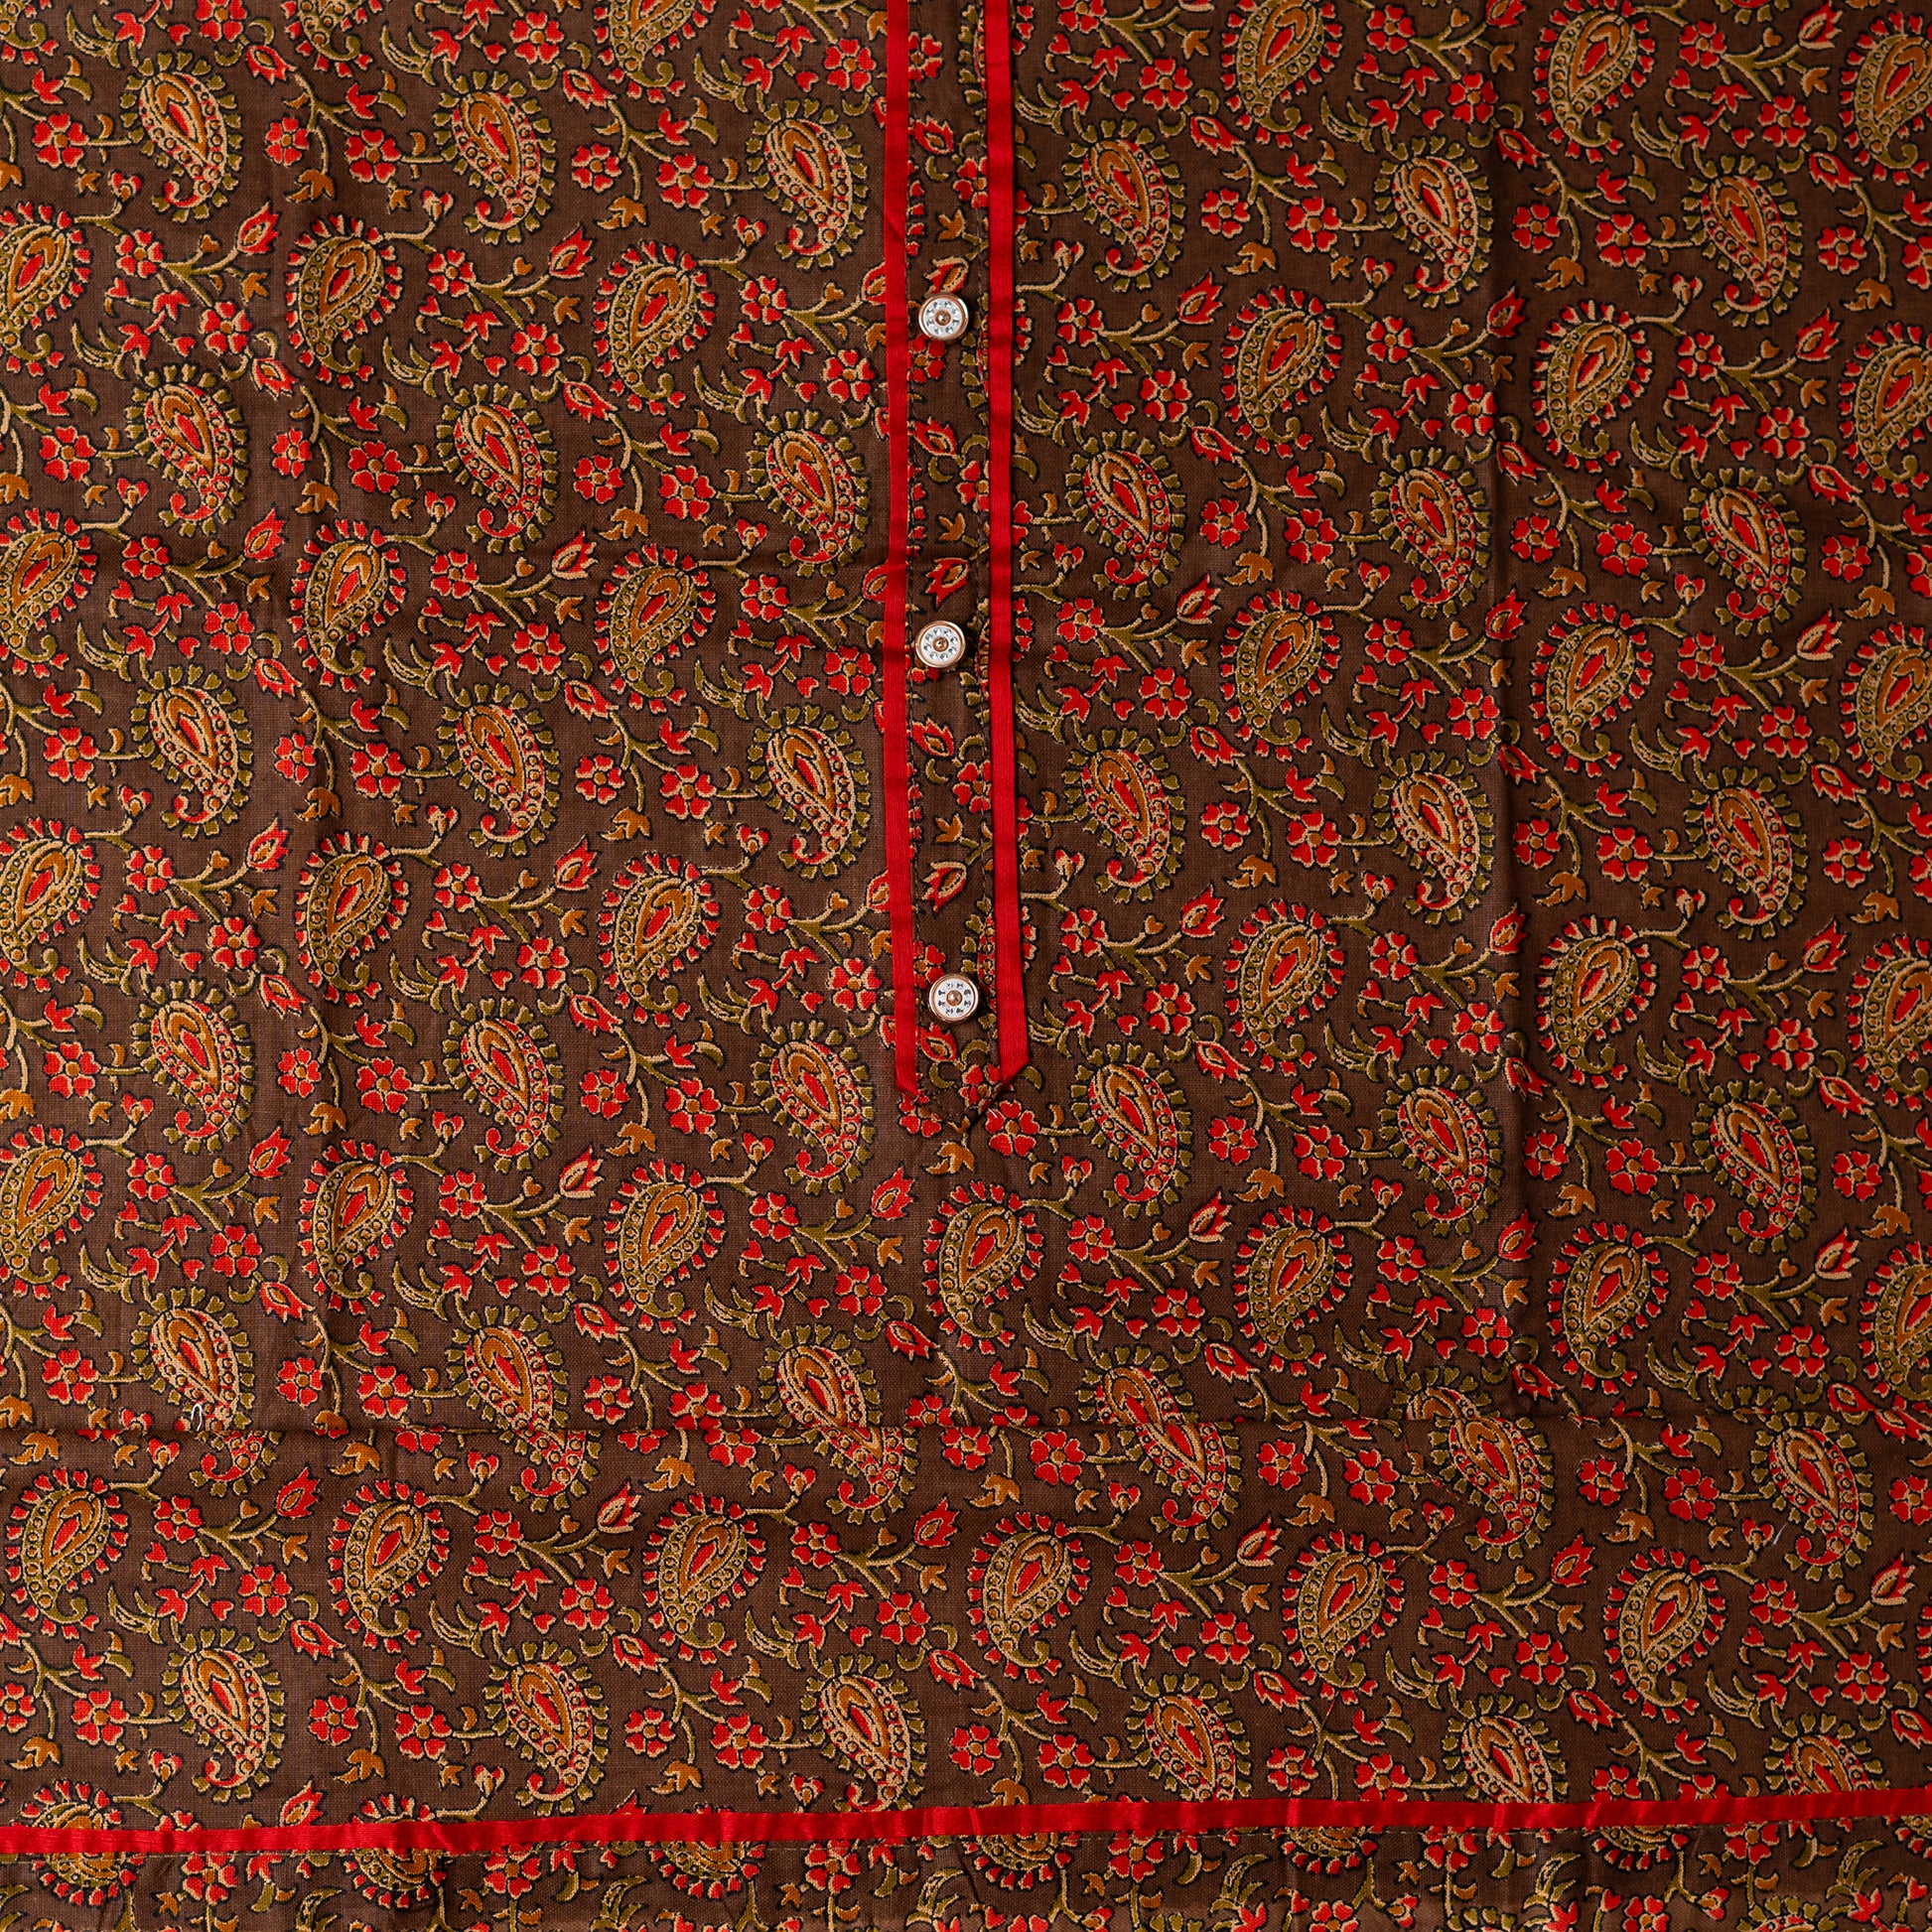 cotton top material with brown color base and multi color beautiful print design, it has show buttons in the neck area and also red color piping in the border